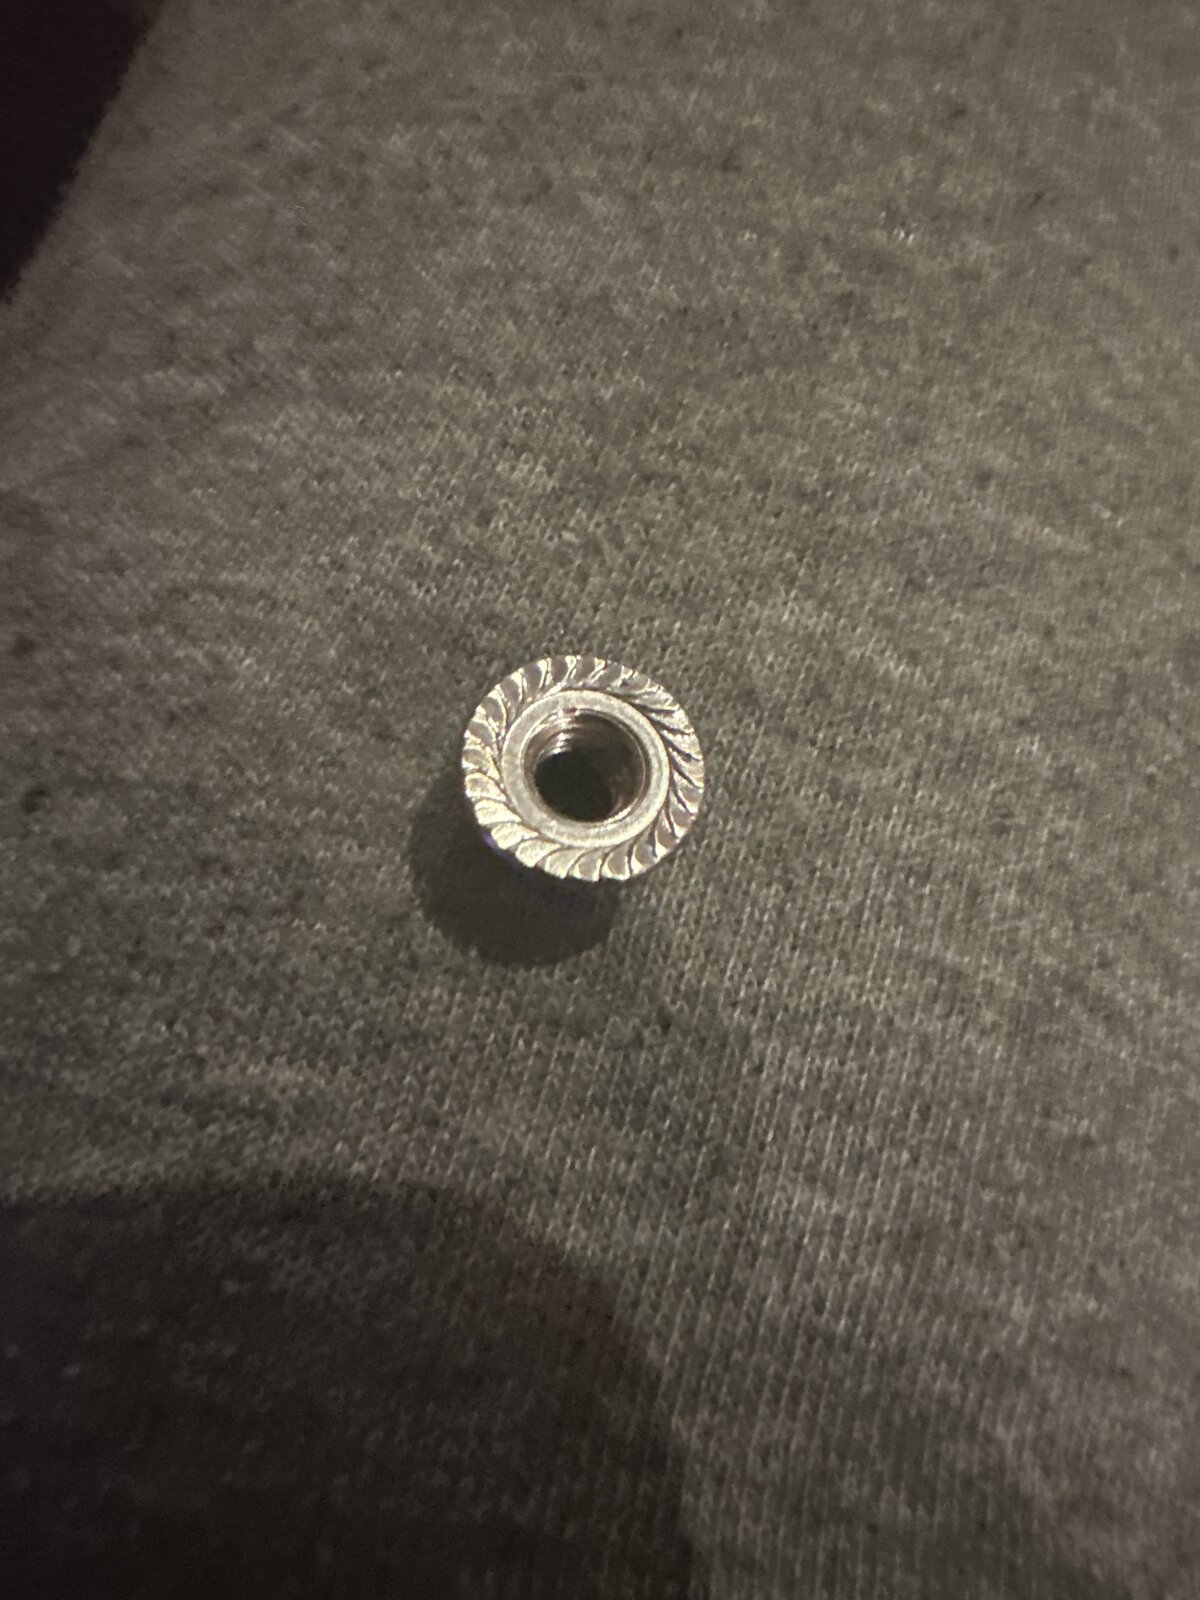 my spur gear keeps getting loose the bolt i keep tigting it completly ...